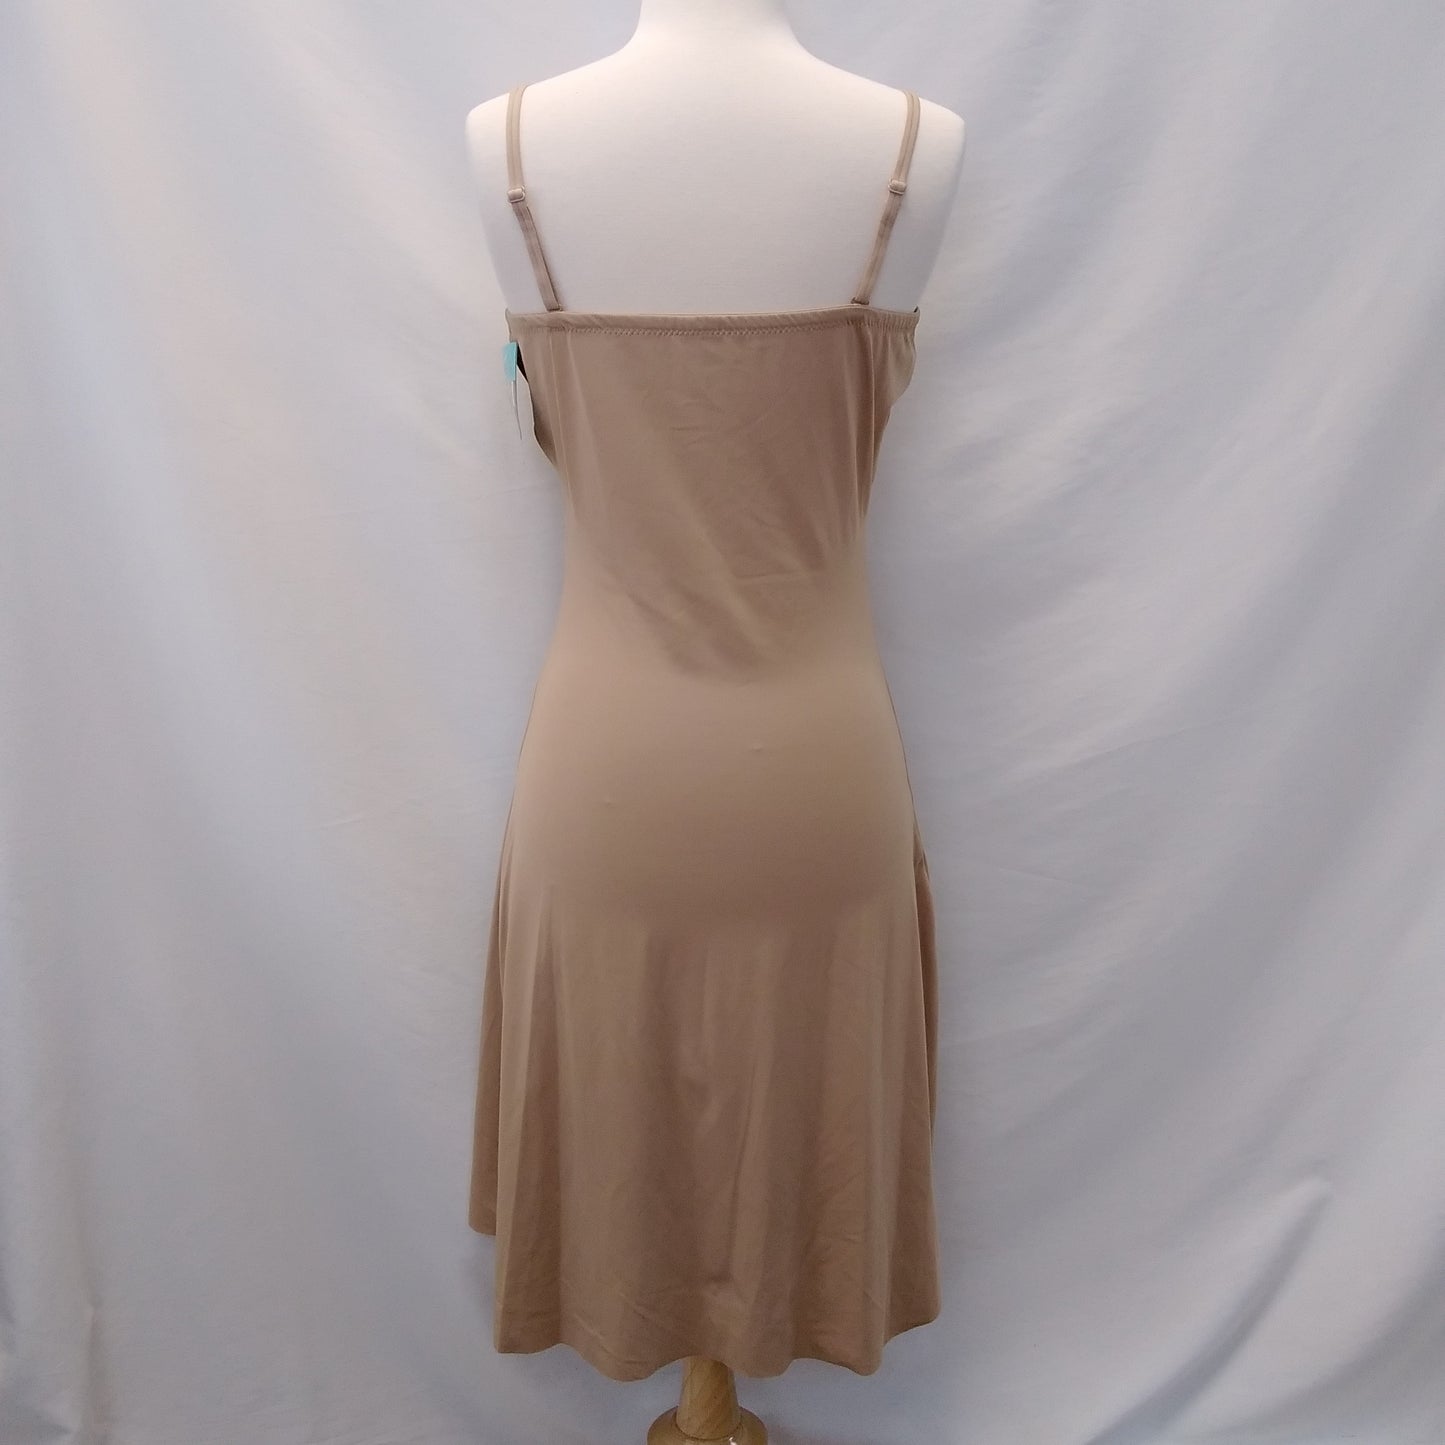 NWT - ASSETS by Sara Blakely nude Convertible Slip Dress - 2X